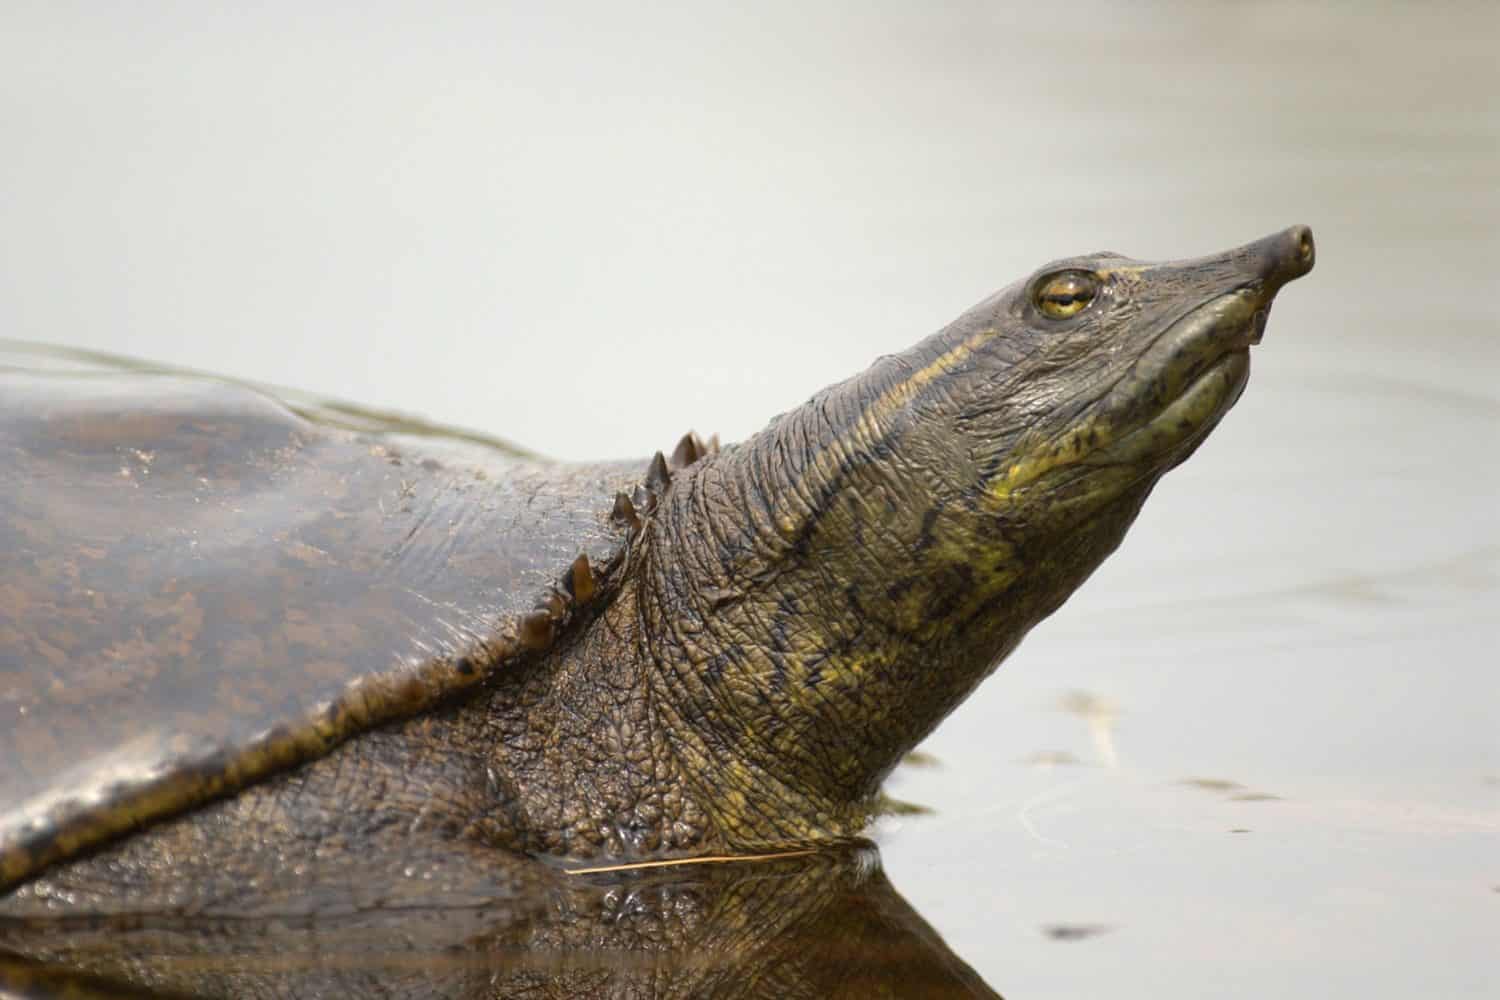 Yangtze Giant Softshell Turtle. This species of turtle is considered the rarest turtle in the world. Only three individuals were known to exist as of 2021—one in China and two in Vietnam